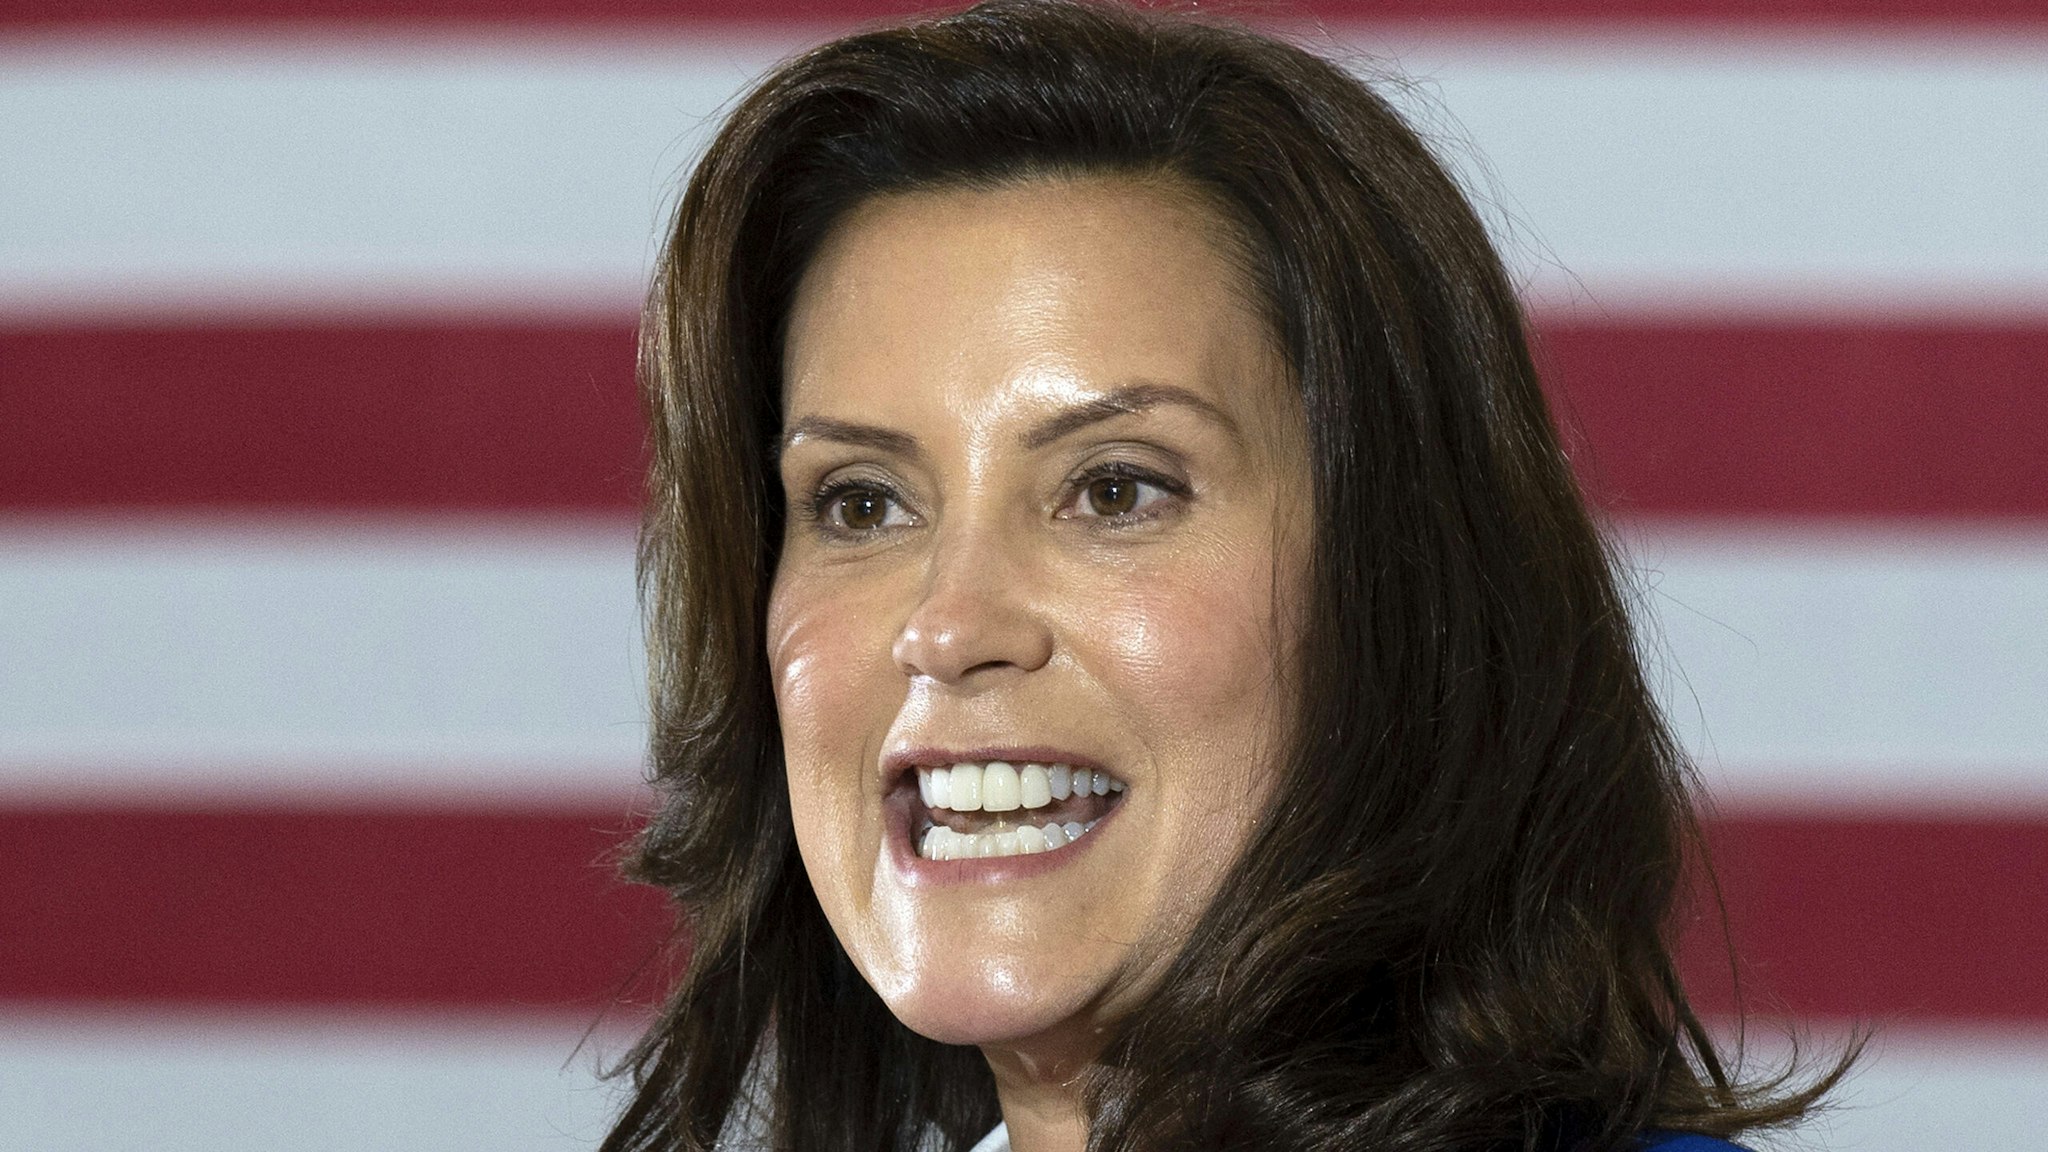 Michigan Governor Gretchen Whitmer introduces Democratic Presidential Candidate Joe Biden to speak at Beech Woods Recreation Center in Southfield, Michigan, on October 16, 2020. - Joe Biden on October 16, 2020 described President Donald Trump's reluctance to denounce white supremacists as "stunning" in a hard-hitting speech in battleground Michigan with 18 days to go until the election.